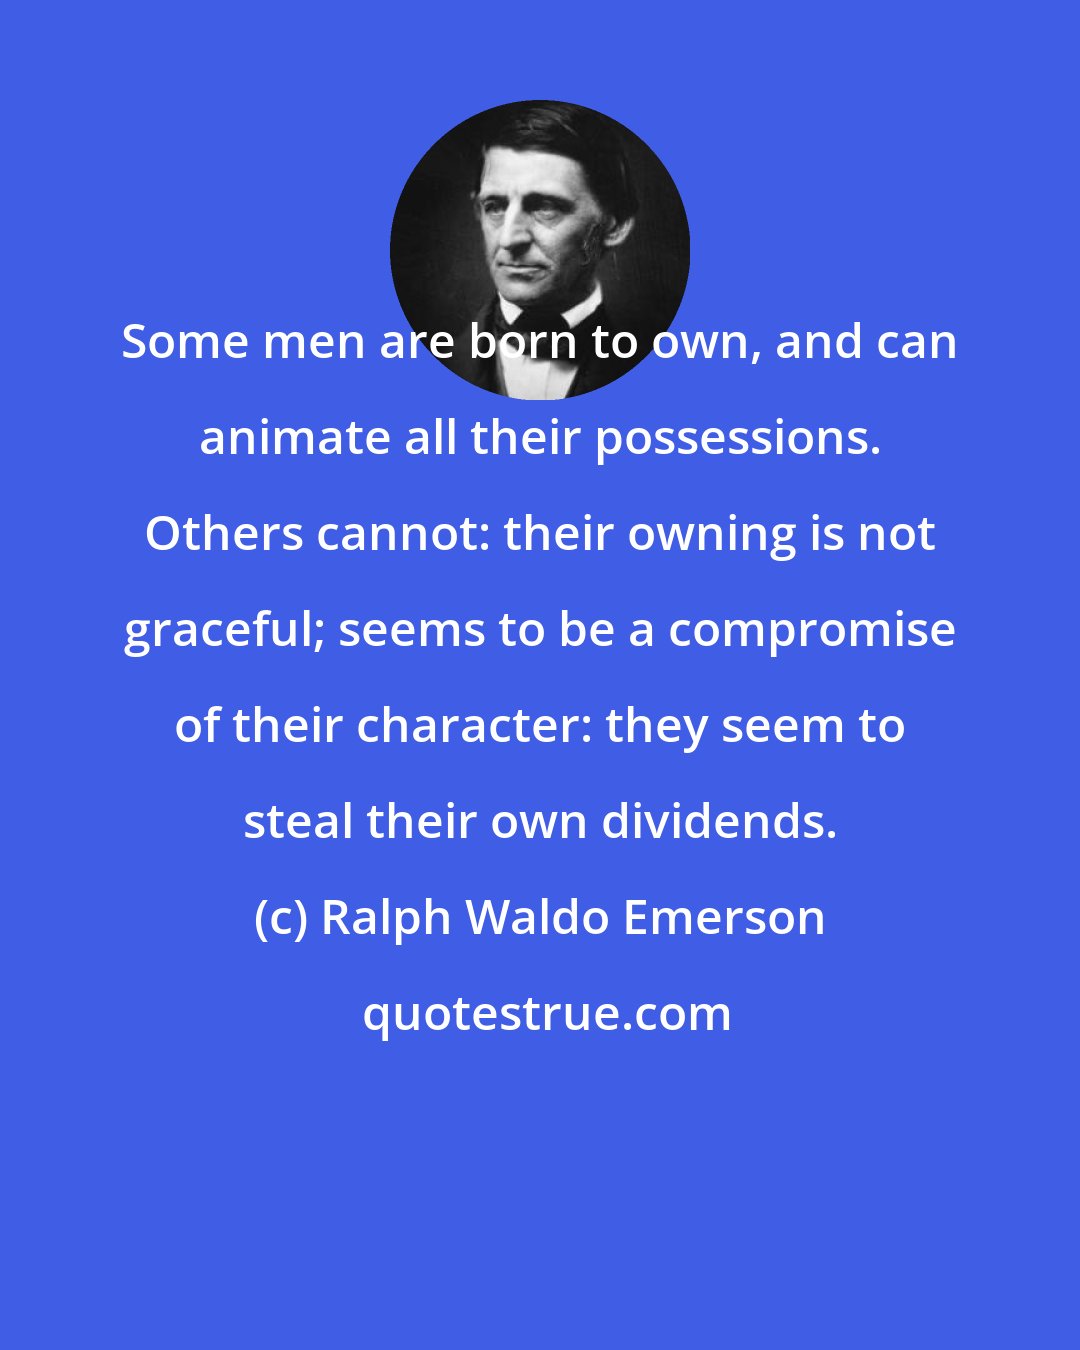 Ralph Waldo Emerson: Some men are born to own, and can animate all their possessions. Others cannot: their owning is not graceful; seems to be a compromise of their character: they seem to steal their own dividends.